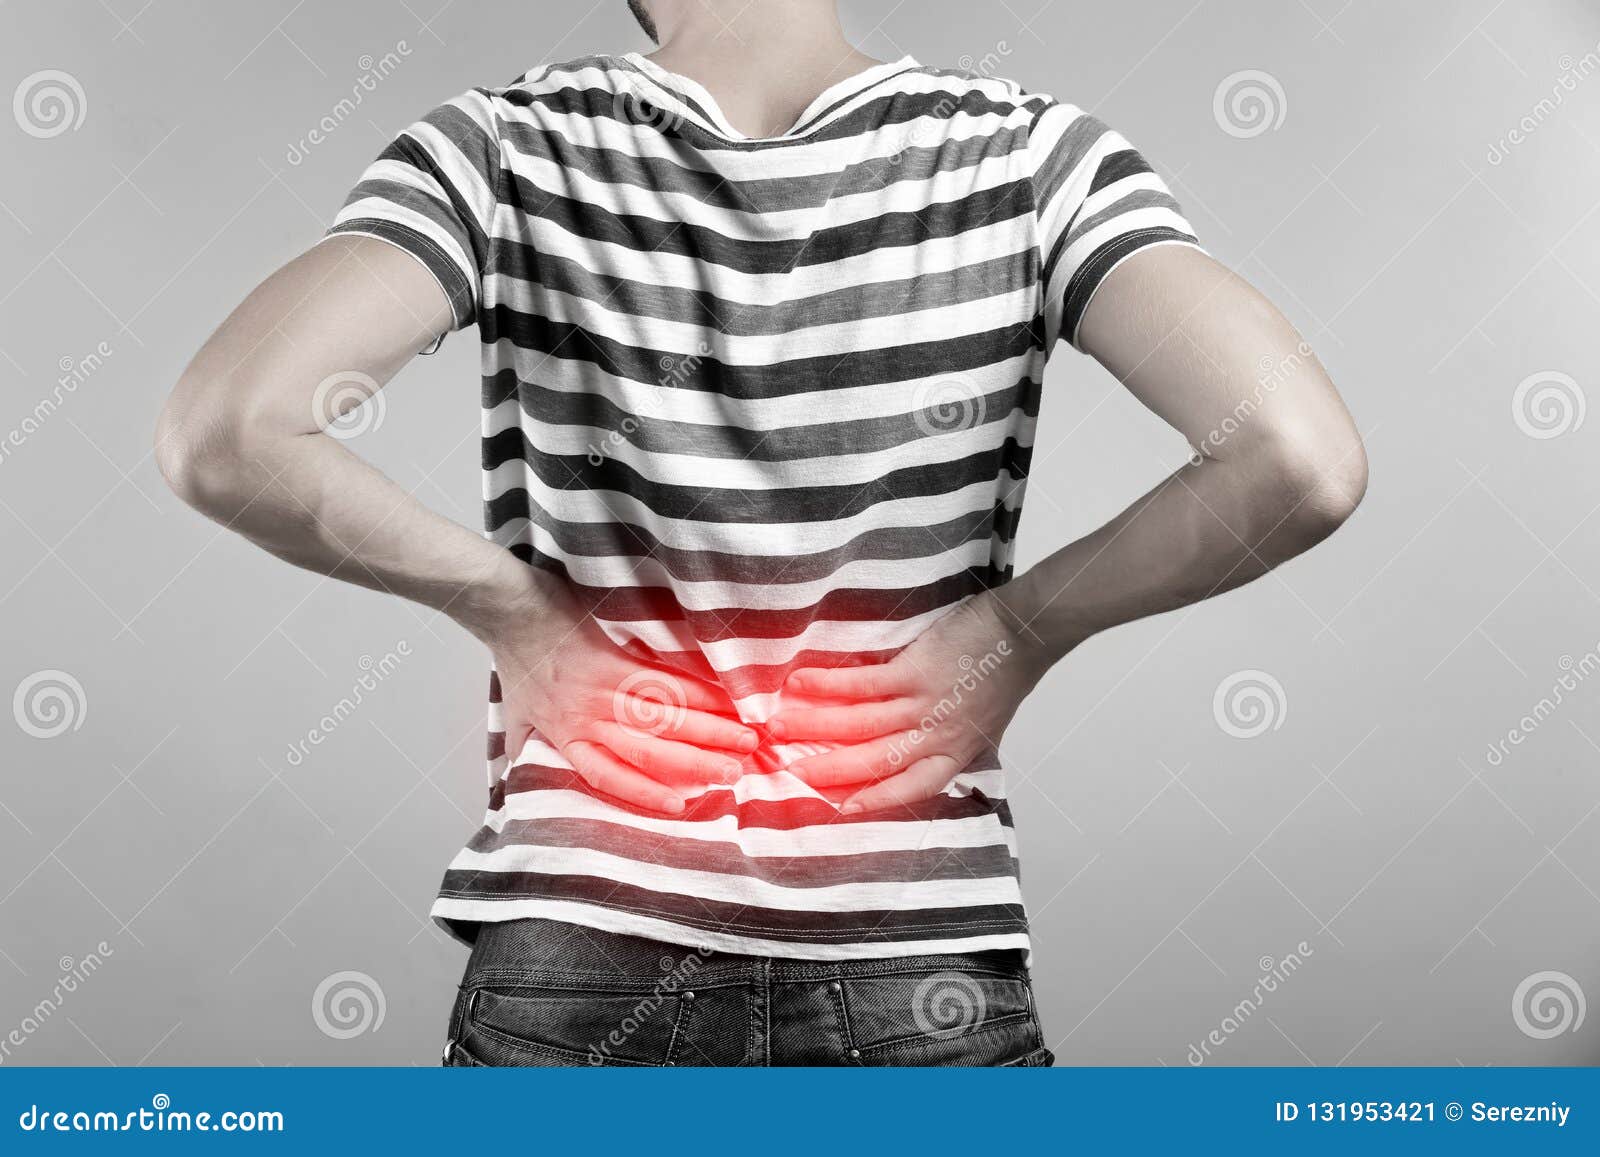 Man Suffering From Back Pain On Grey Background Stock Image Image Of